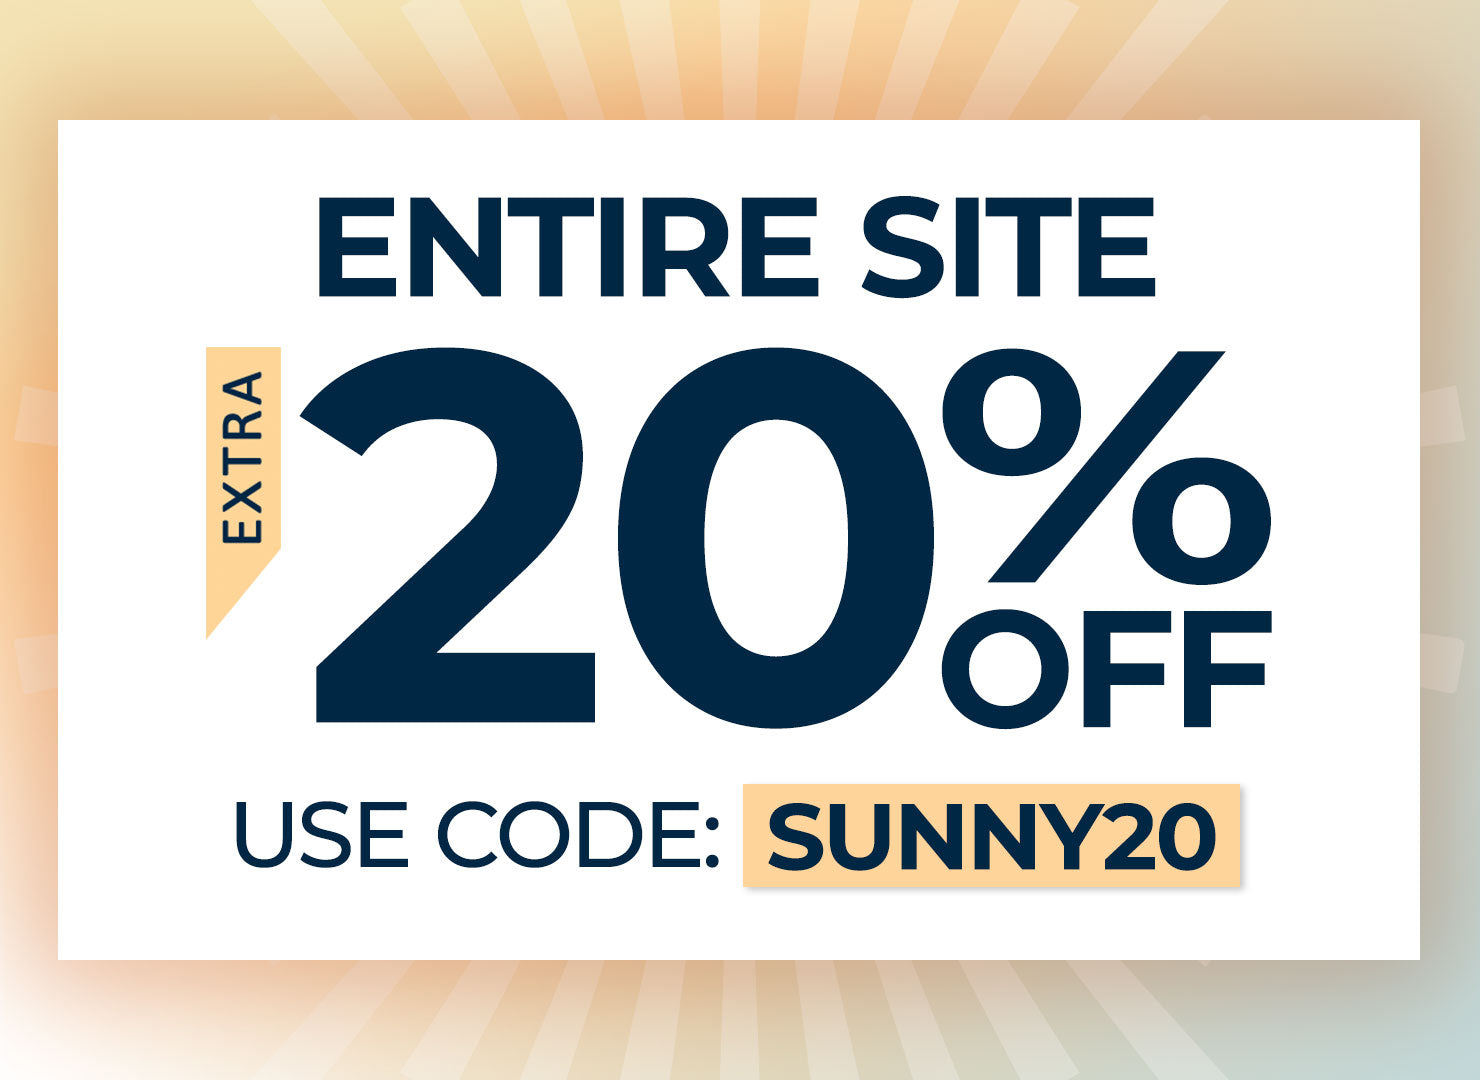 A yellow and blue text graphic offering an extra 20% off on the entire site with the use of code sunny20.